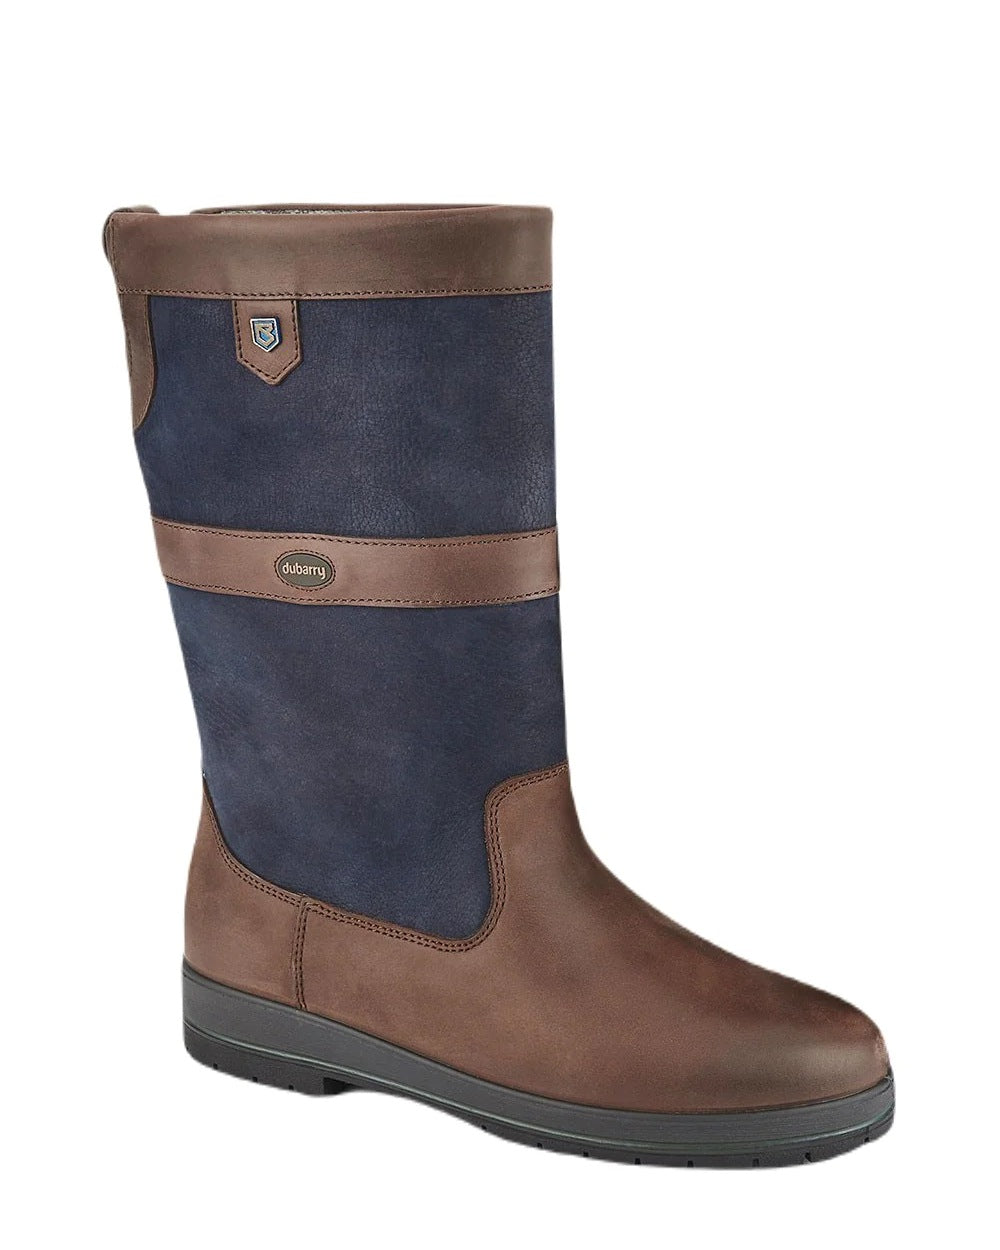 Dubarry Kildare Country Boots in Navy Brown 